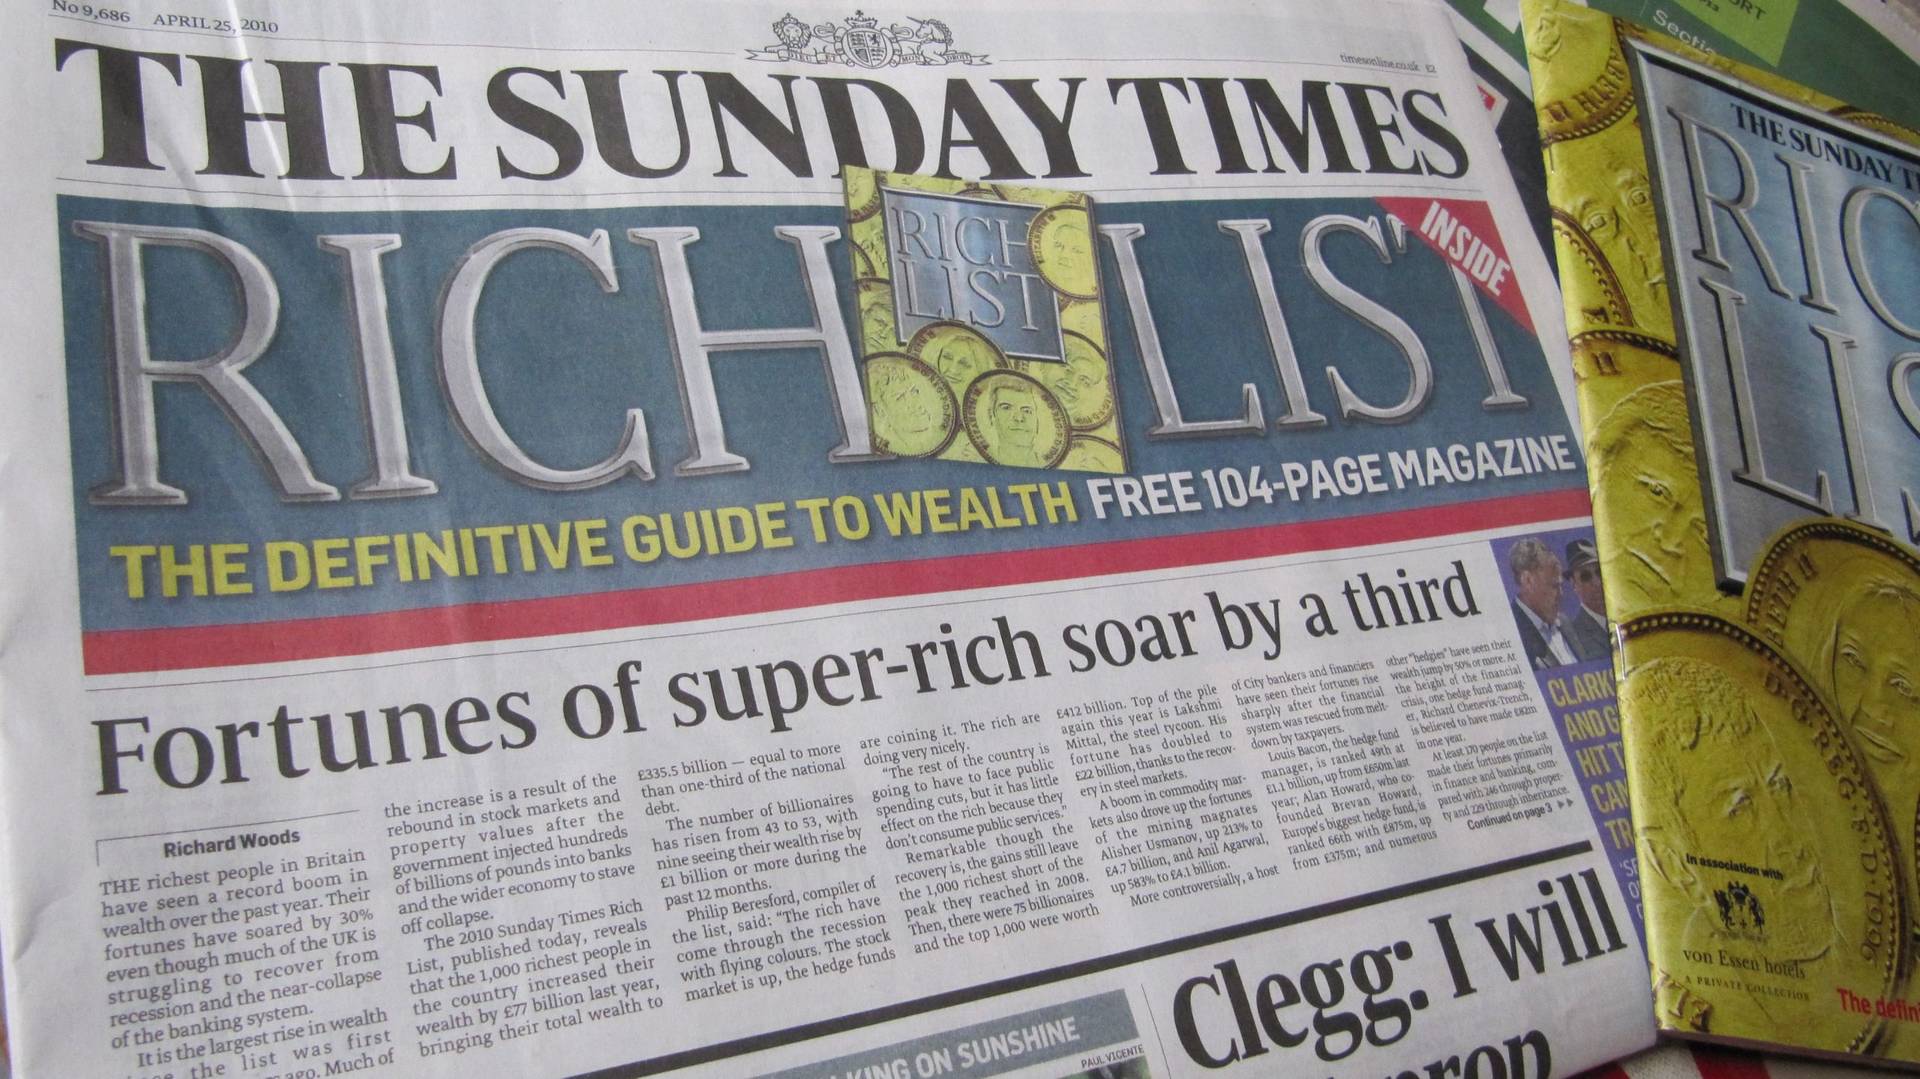 The Sunday Times Rich List 2010